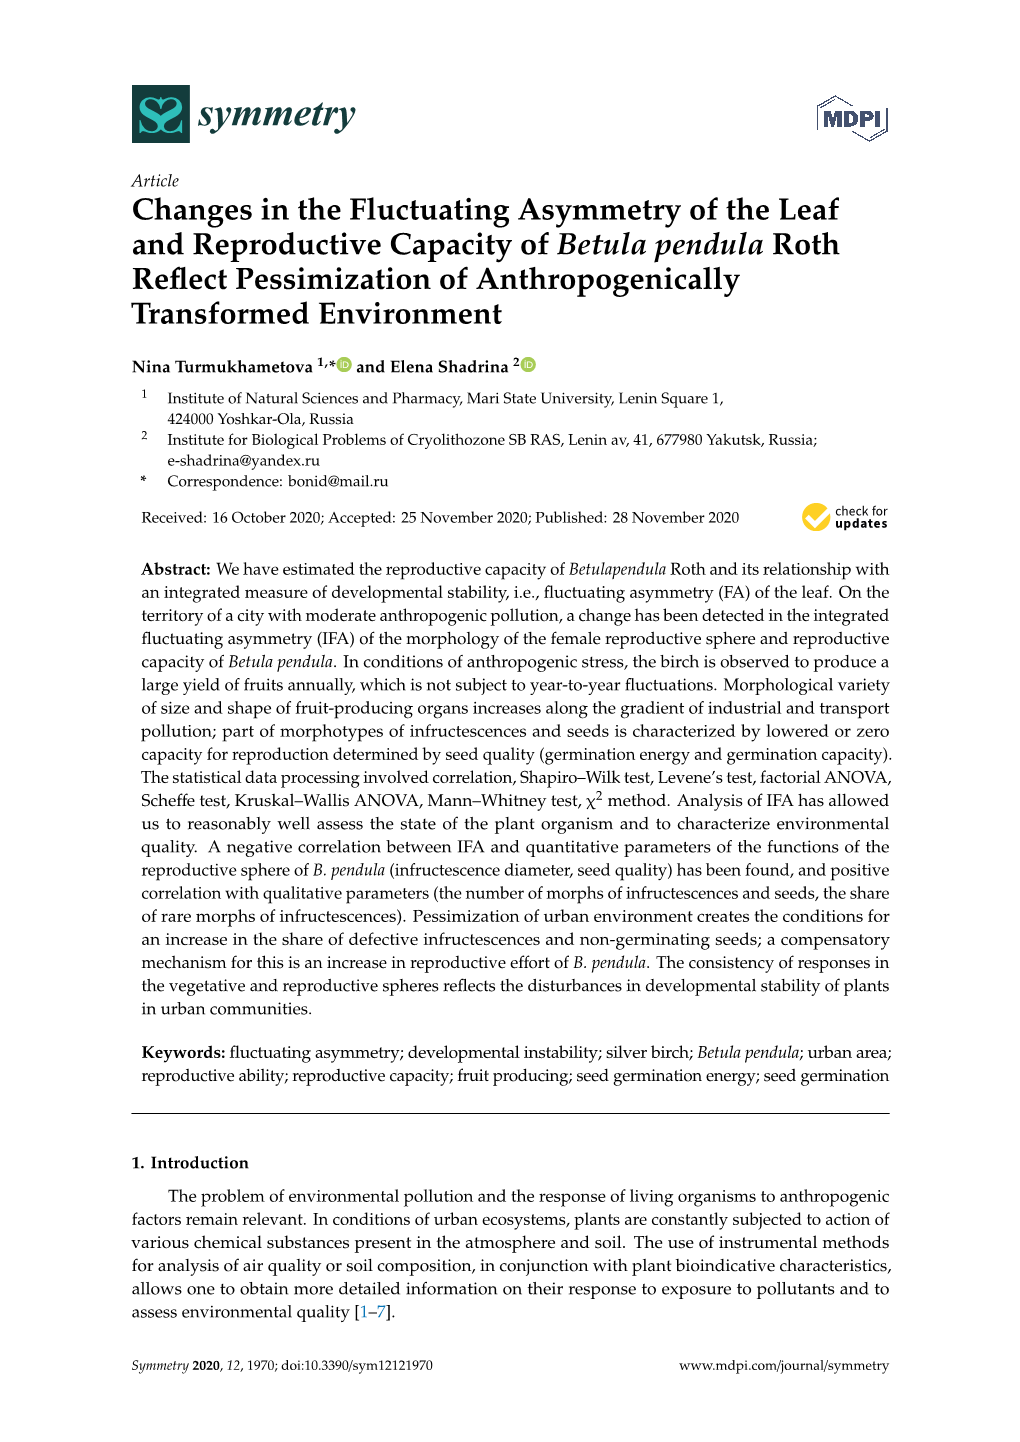 Changes in the Fluctuating Asymmetry of the Leaf and Reproductive Capacity of Betula Pendula Roth Reﬂect Pessimization of Anthropogenically Transformed Environment